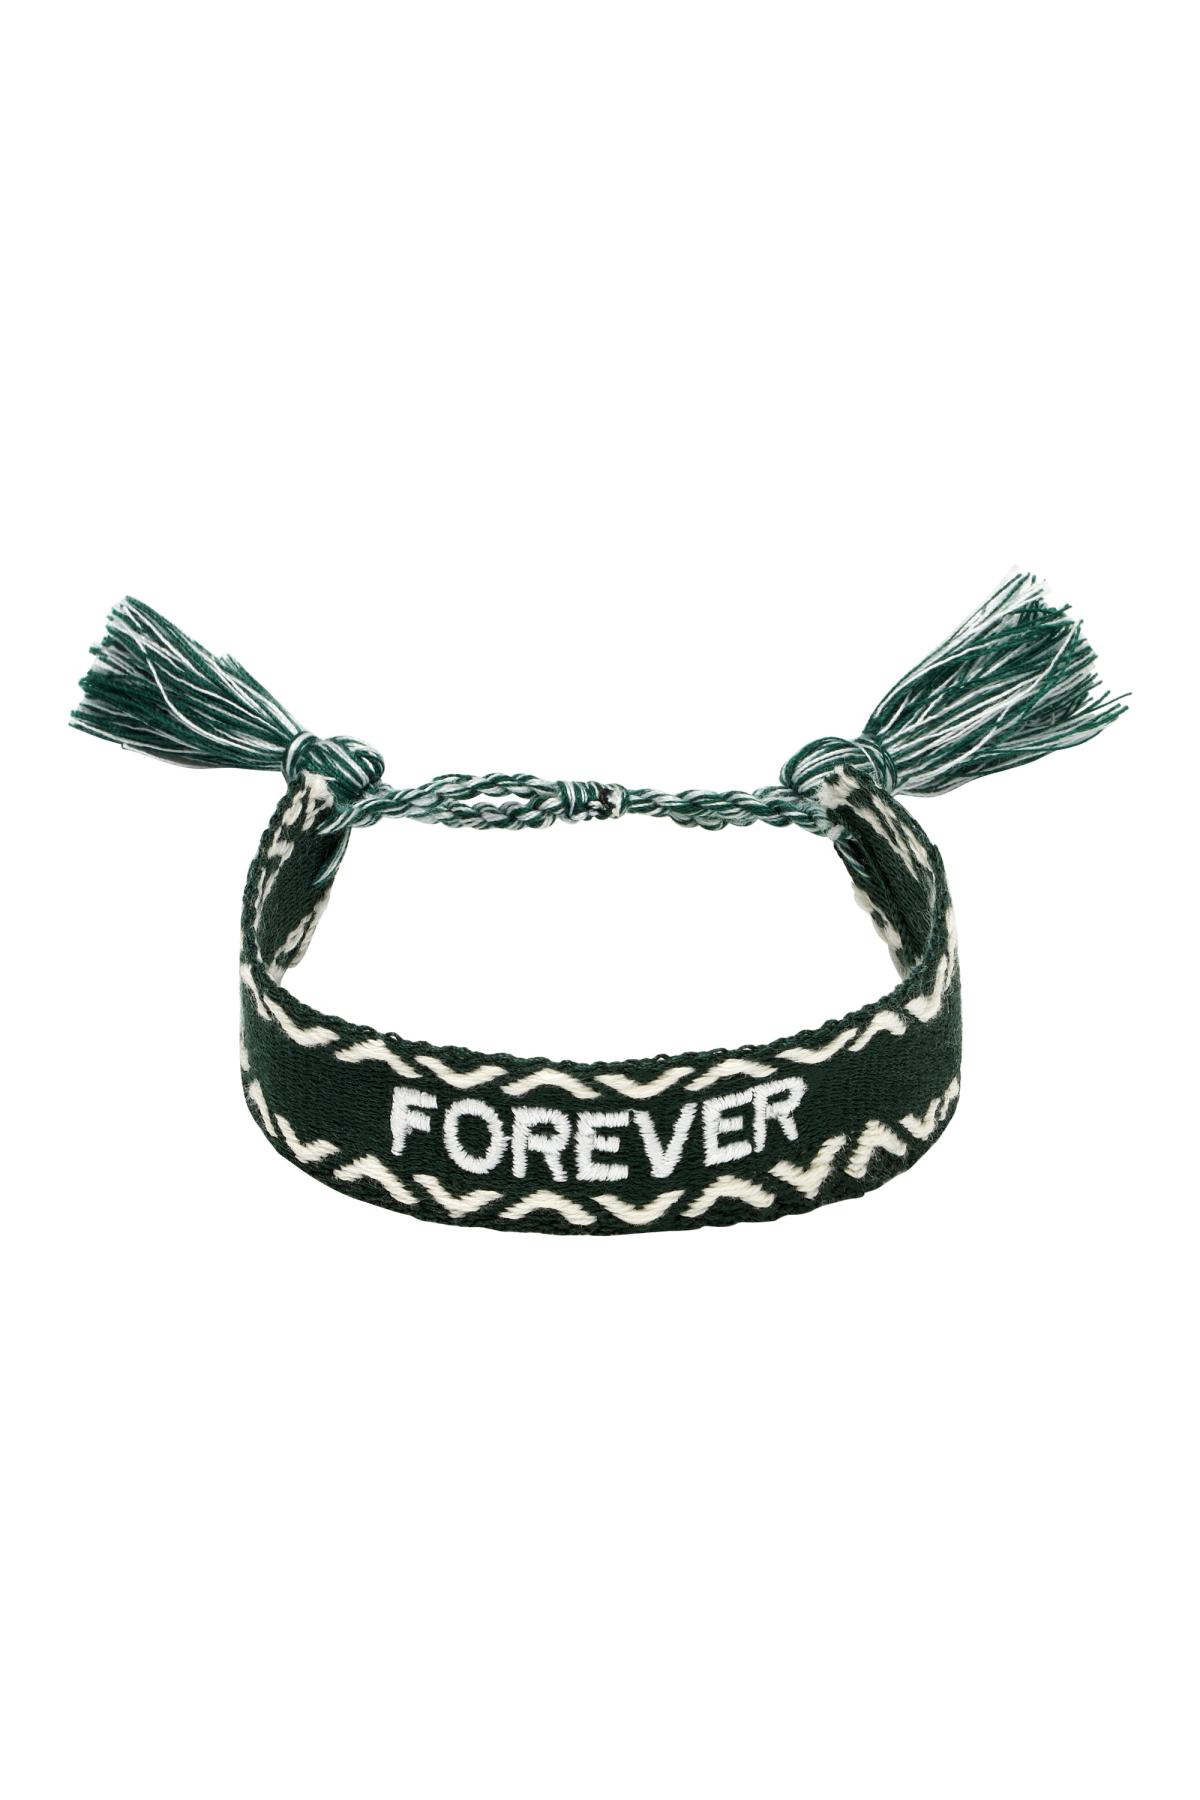 Armband Woven Forever Grün Polyester One size